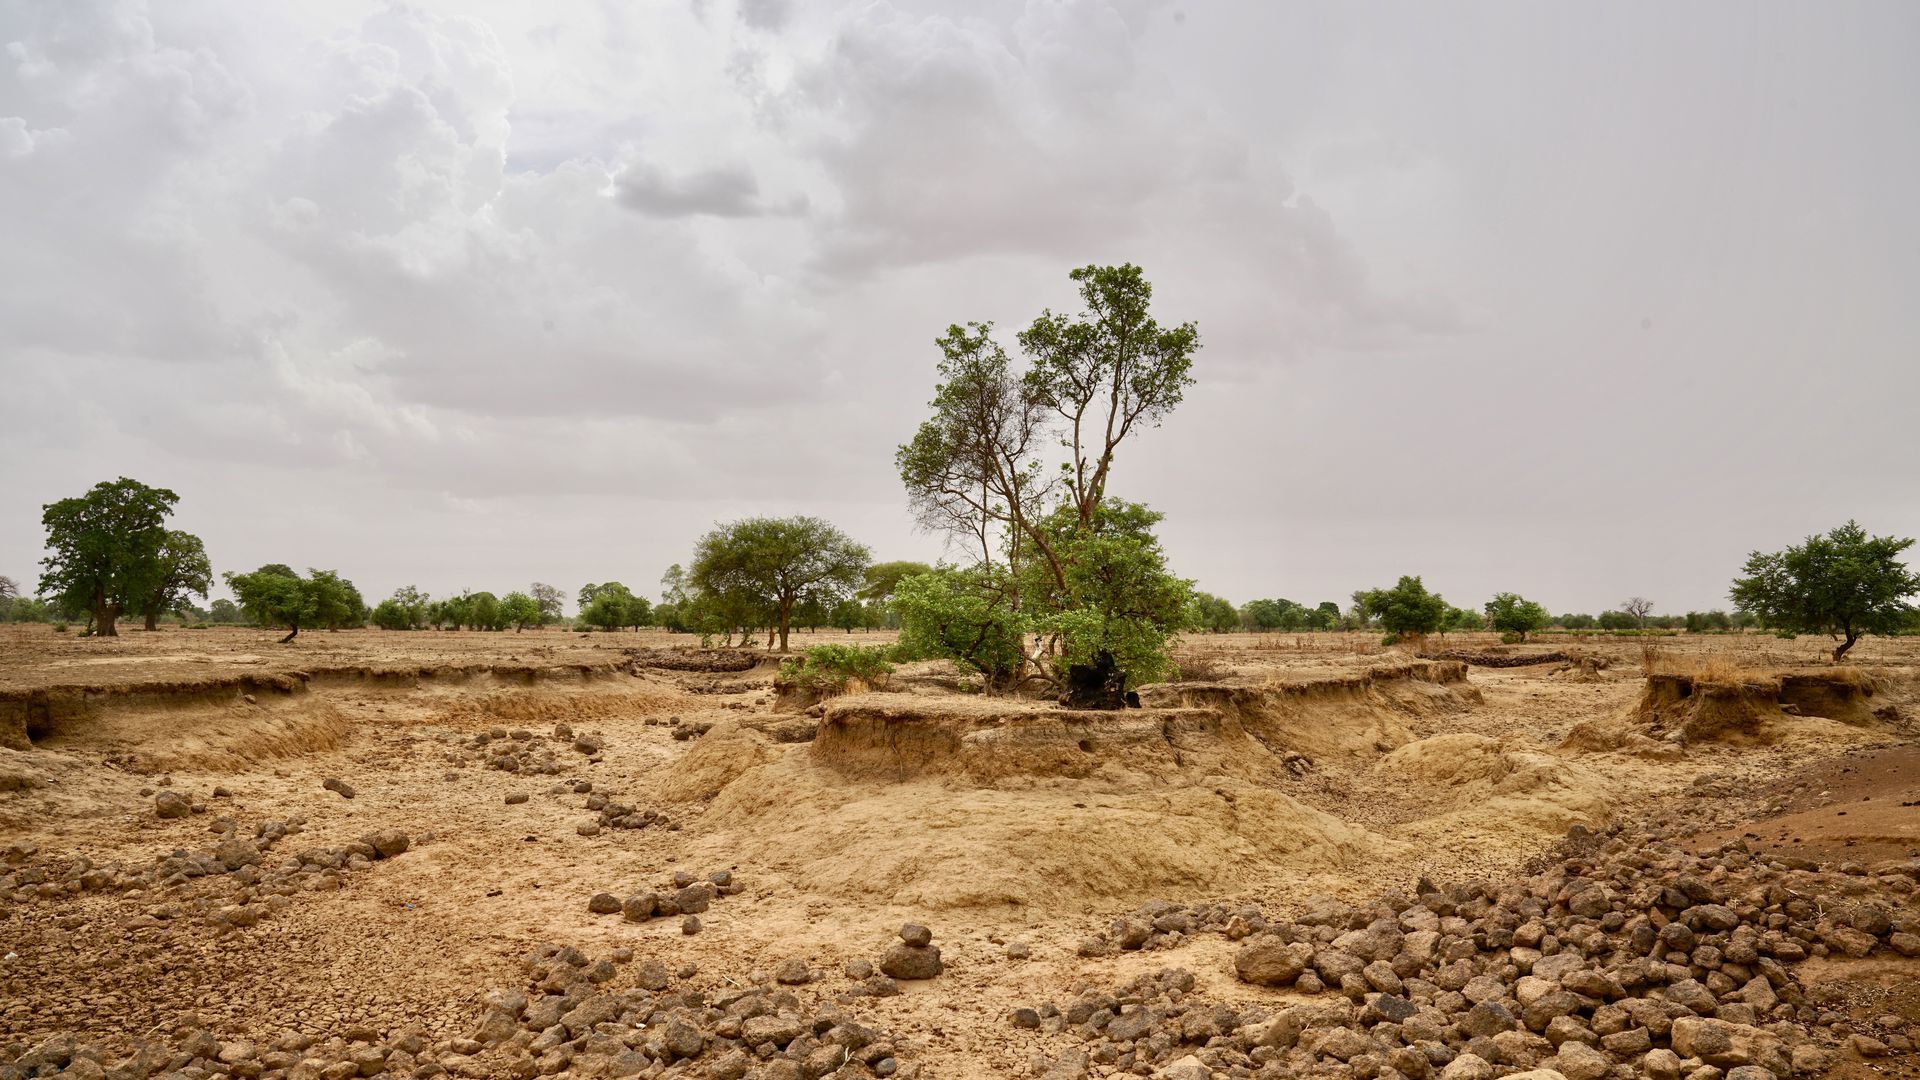 Photo of a desert area with an enclave of green trees 